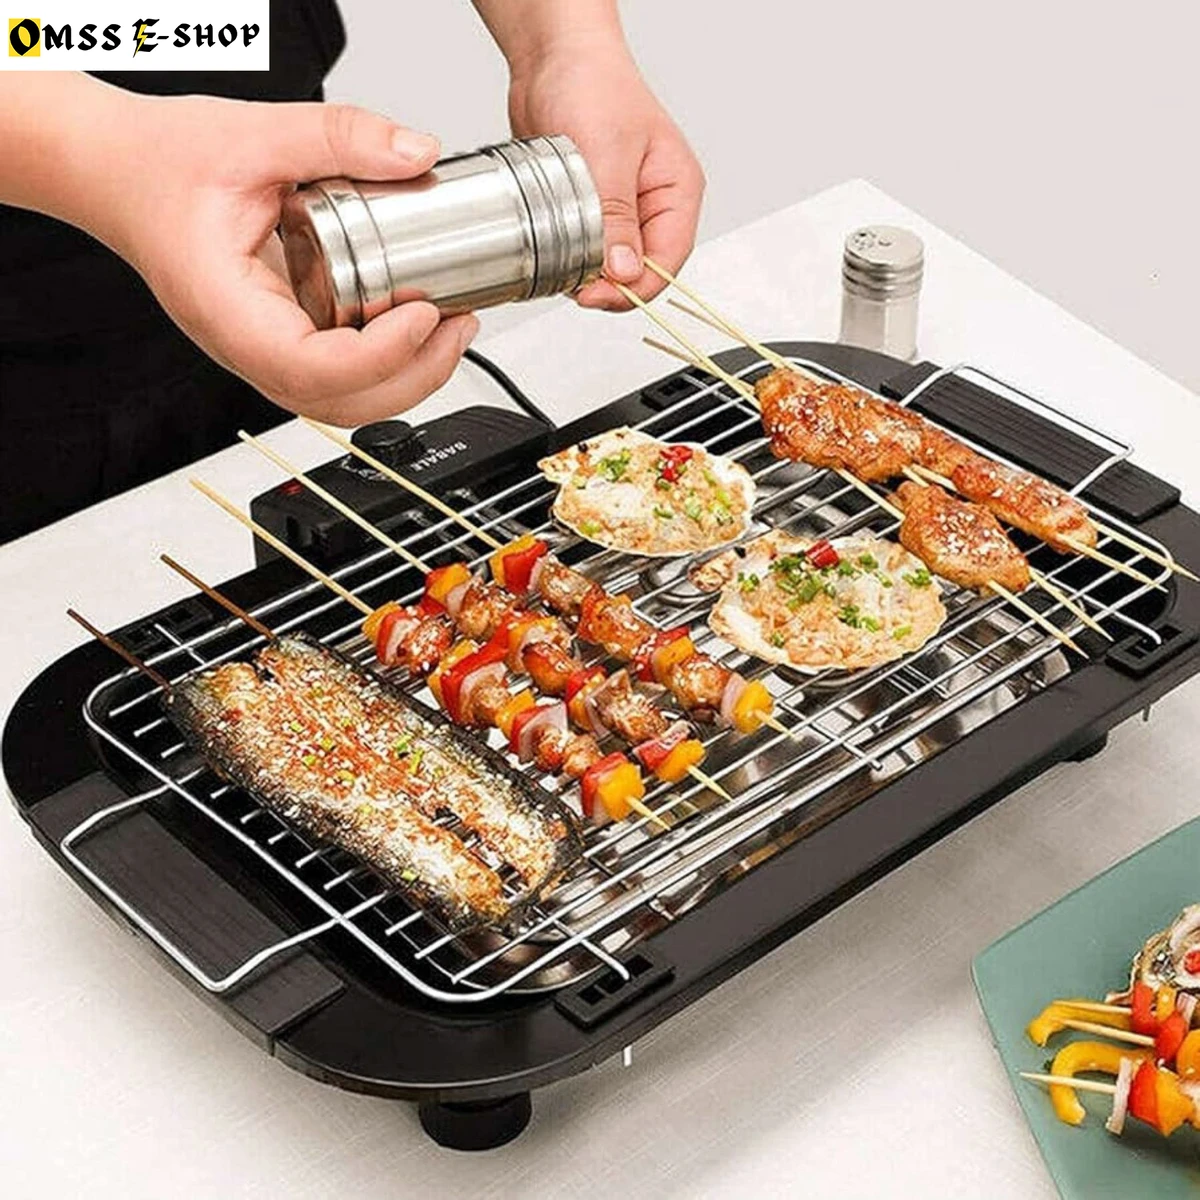 Electric BBQ Grill Machine - Black Electric BBQ Grill 2000W, Barbecue Machine, Nonstick U-shaped Heating Tube, Smokeless, Portable, Easy To Clean, for Indoor or Outdoor